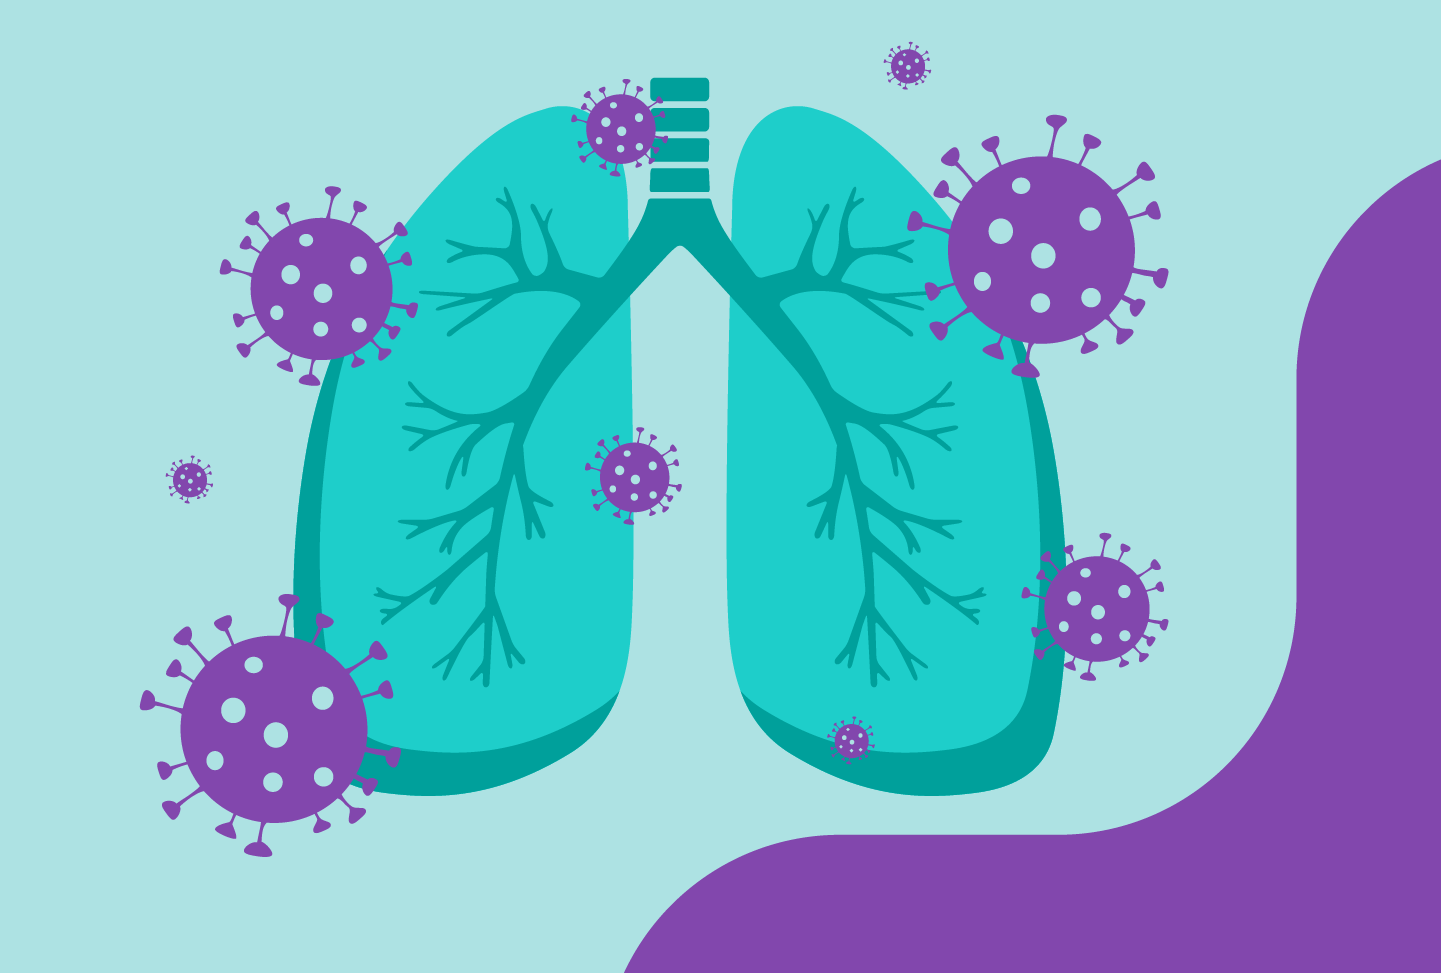 Illustration depicting lungs fighting COVID-19.